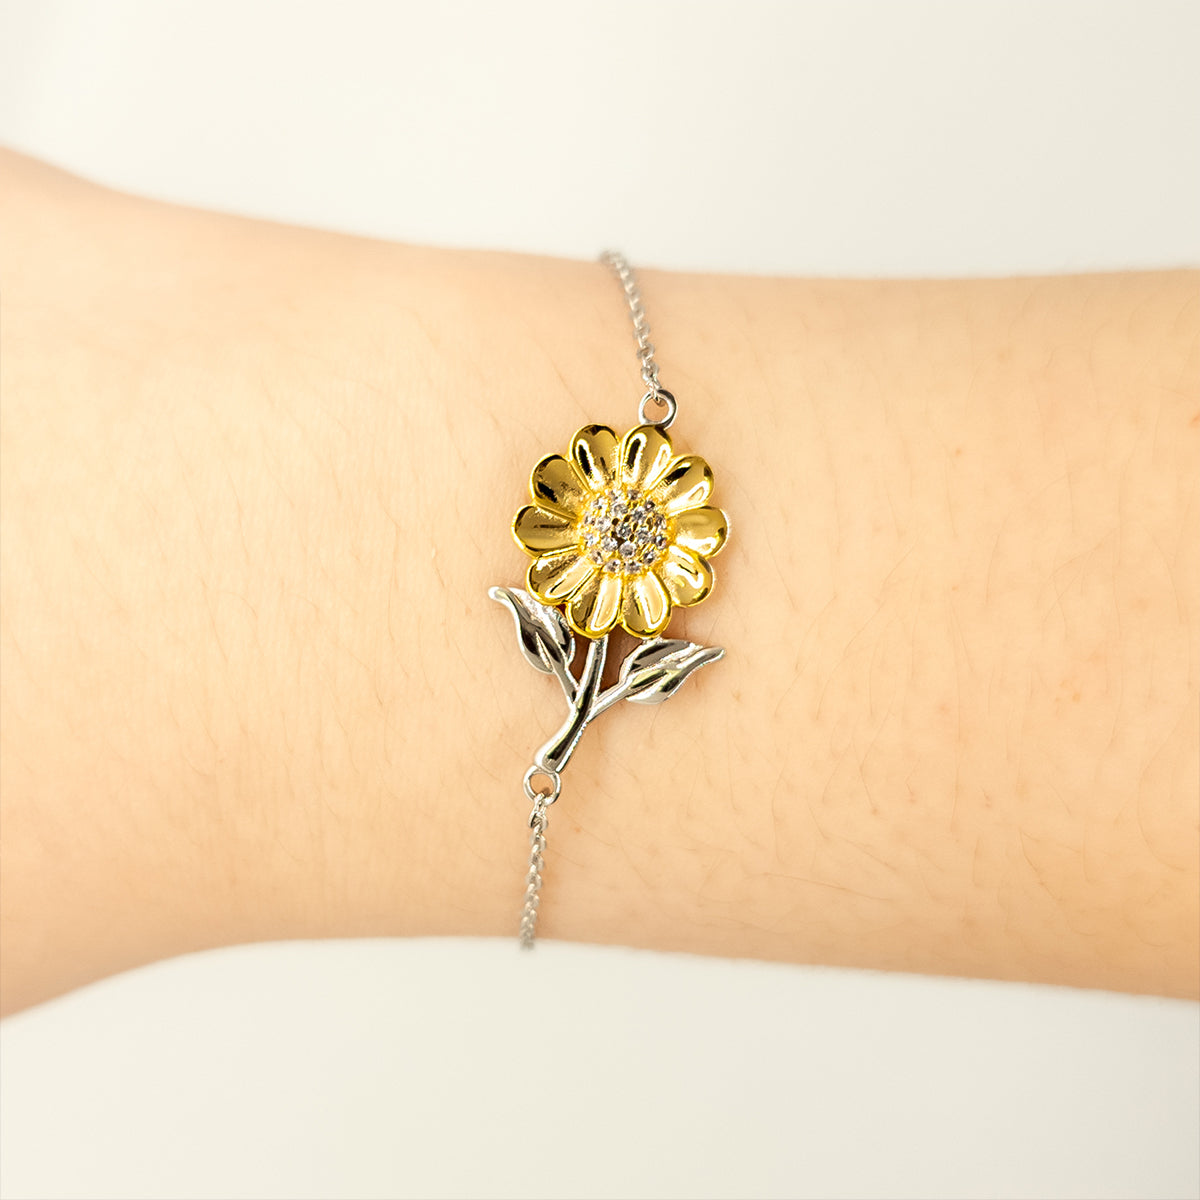 Engraved Sunflower Bracelet for Fiancee - Youll Always Have a Special Place in My Heart - Perfect Gift for Christmas, Birthday, or Anniversary - Express Your Love and Confidence through this Unique, Inspirational Jewelry